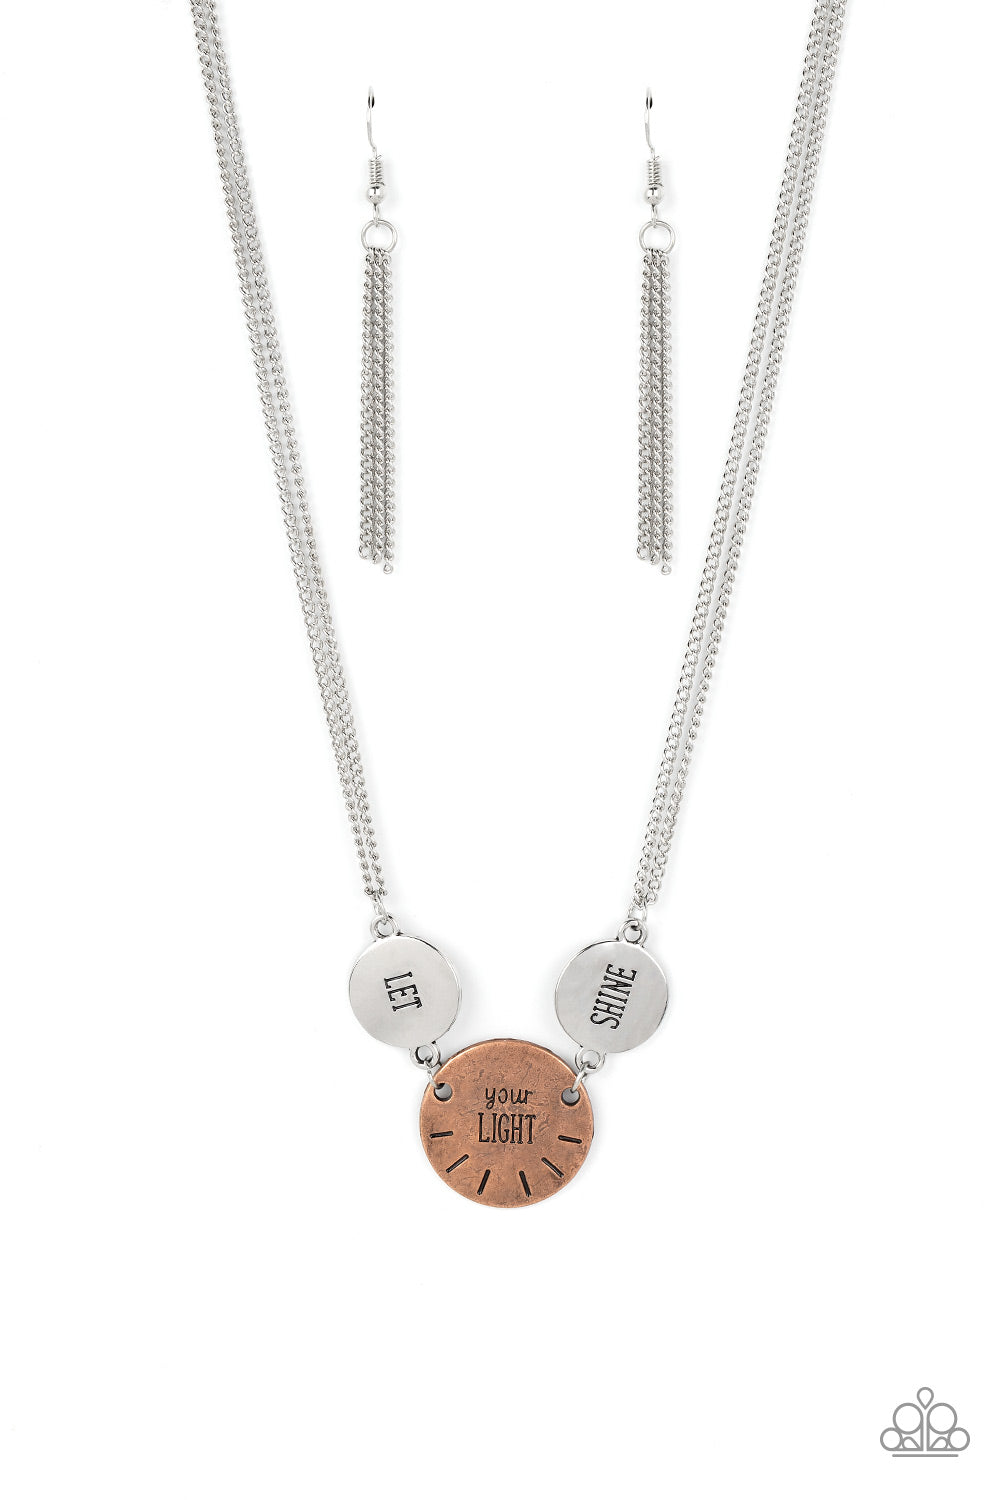 Be The Light Necklace - B the Light Boutique